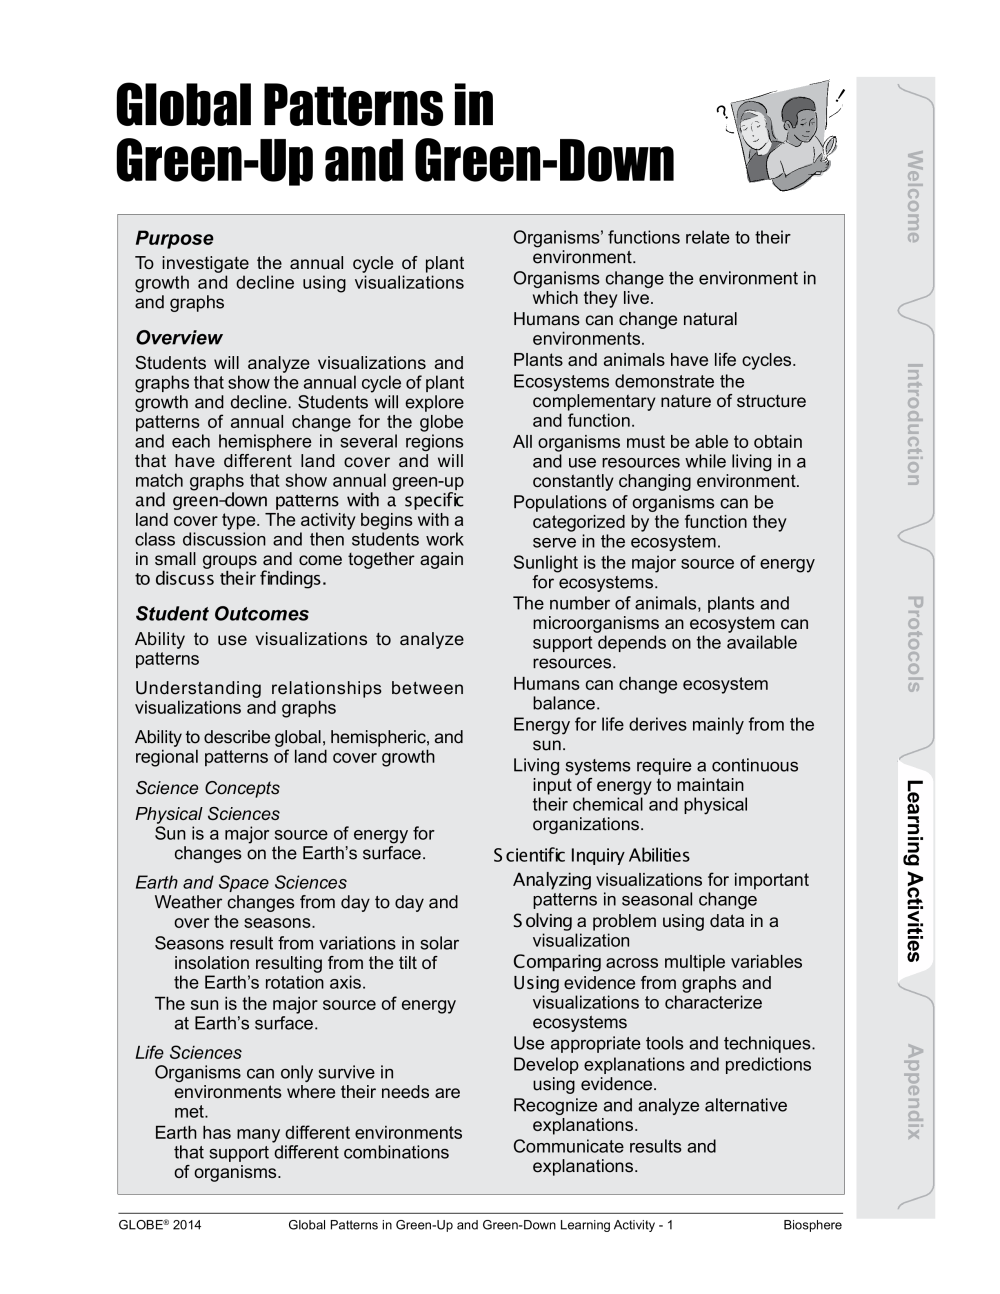 Learning Activities preview for Global Patterns in Green-up and Green-down